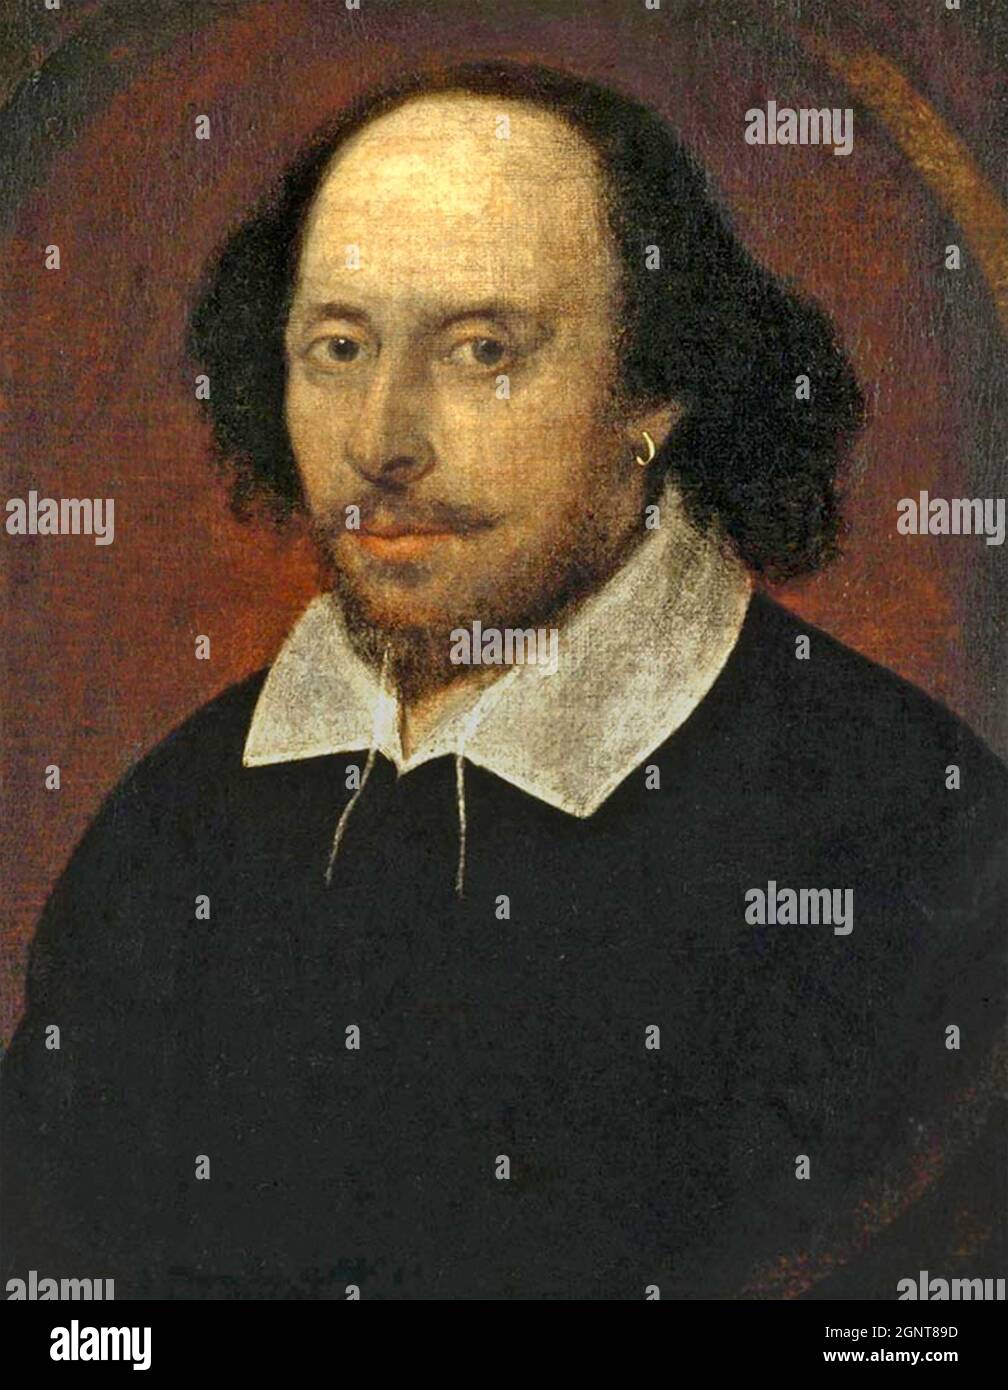 WILLIAM SHAKESPEARE (1564-1616) The Chandos portrait in the National Portrait Gallery, London Stock Photo